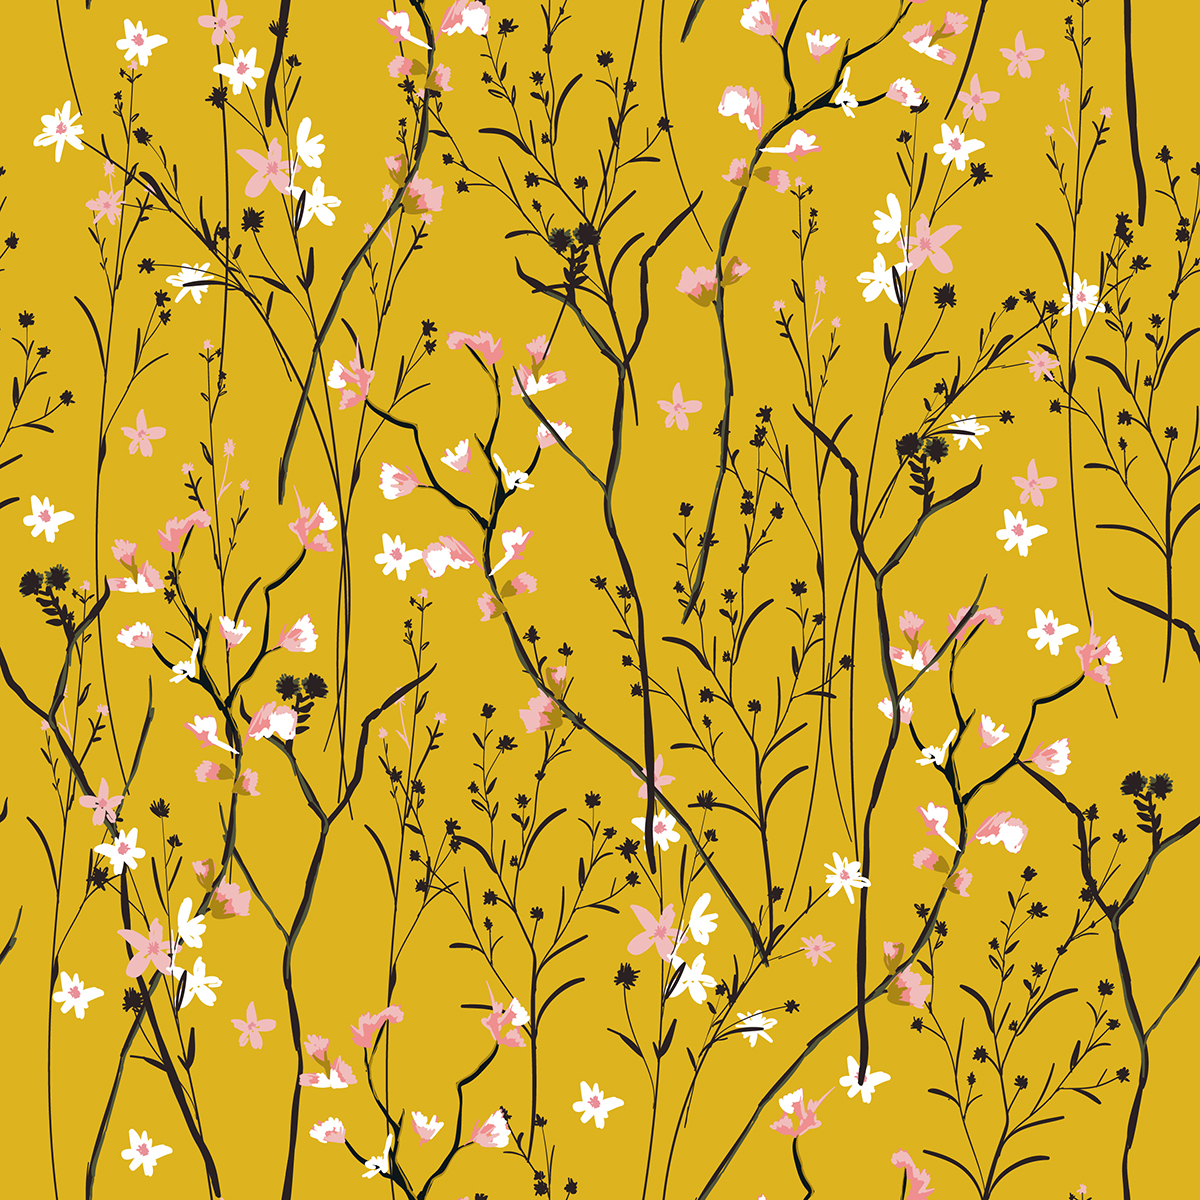 A pattern of flowers on a yellow background